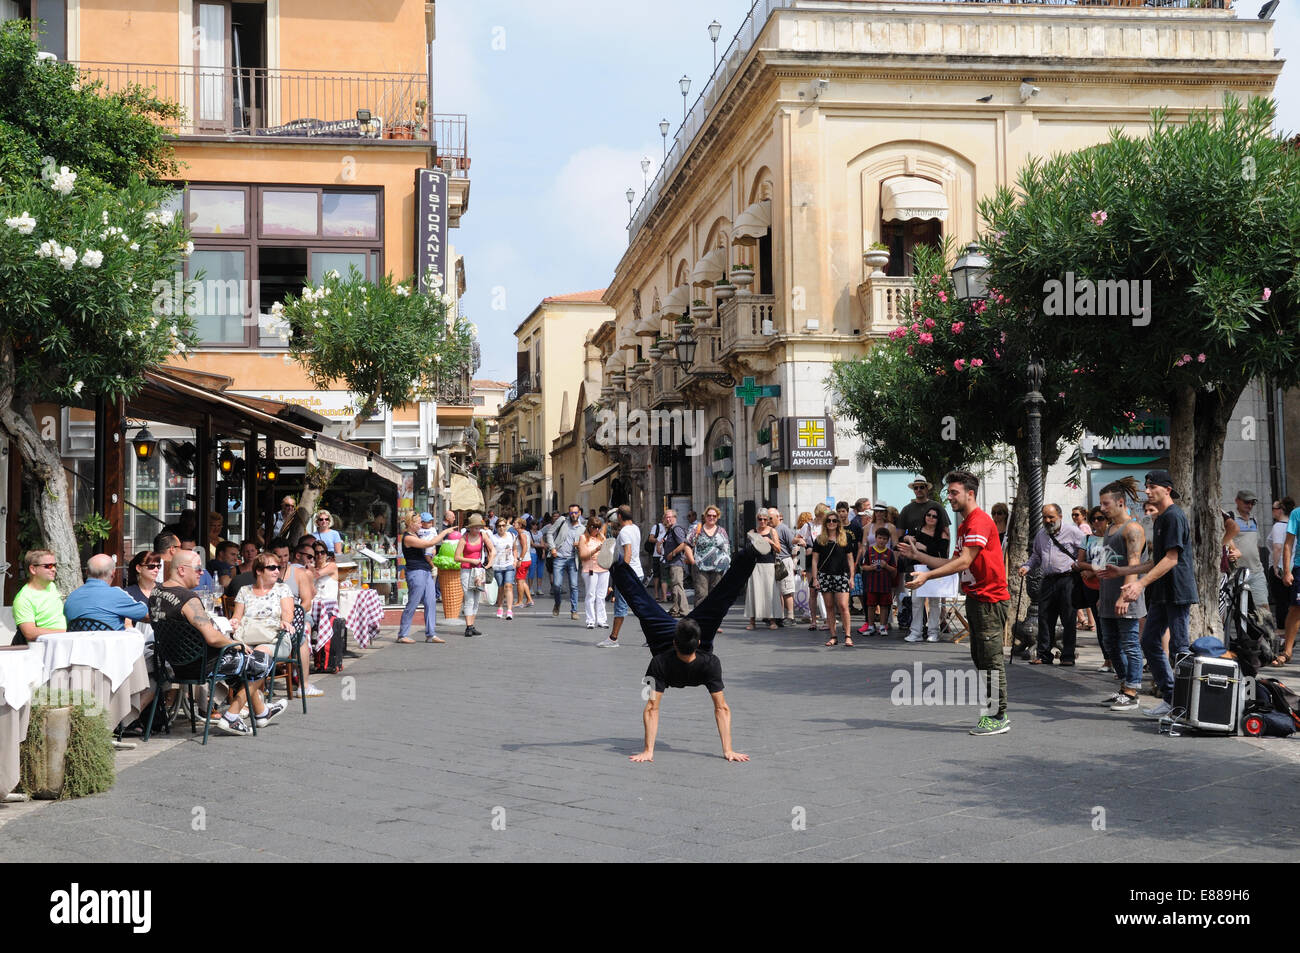 Rap dancers entertaining tourists in a square  Taormina Sicily Italy Stock Photo